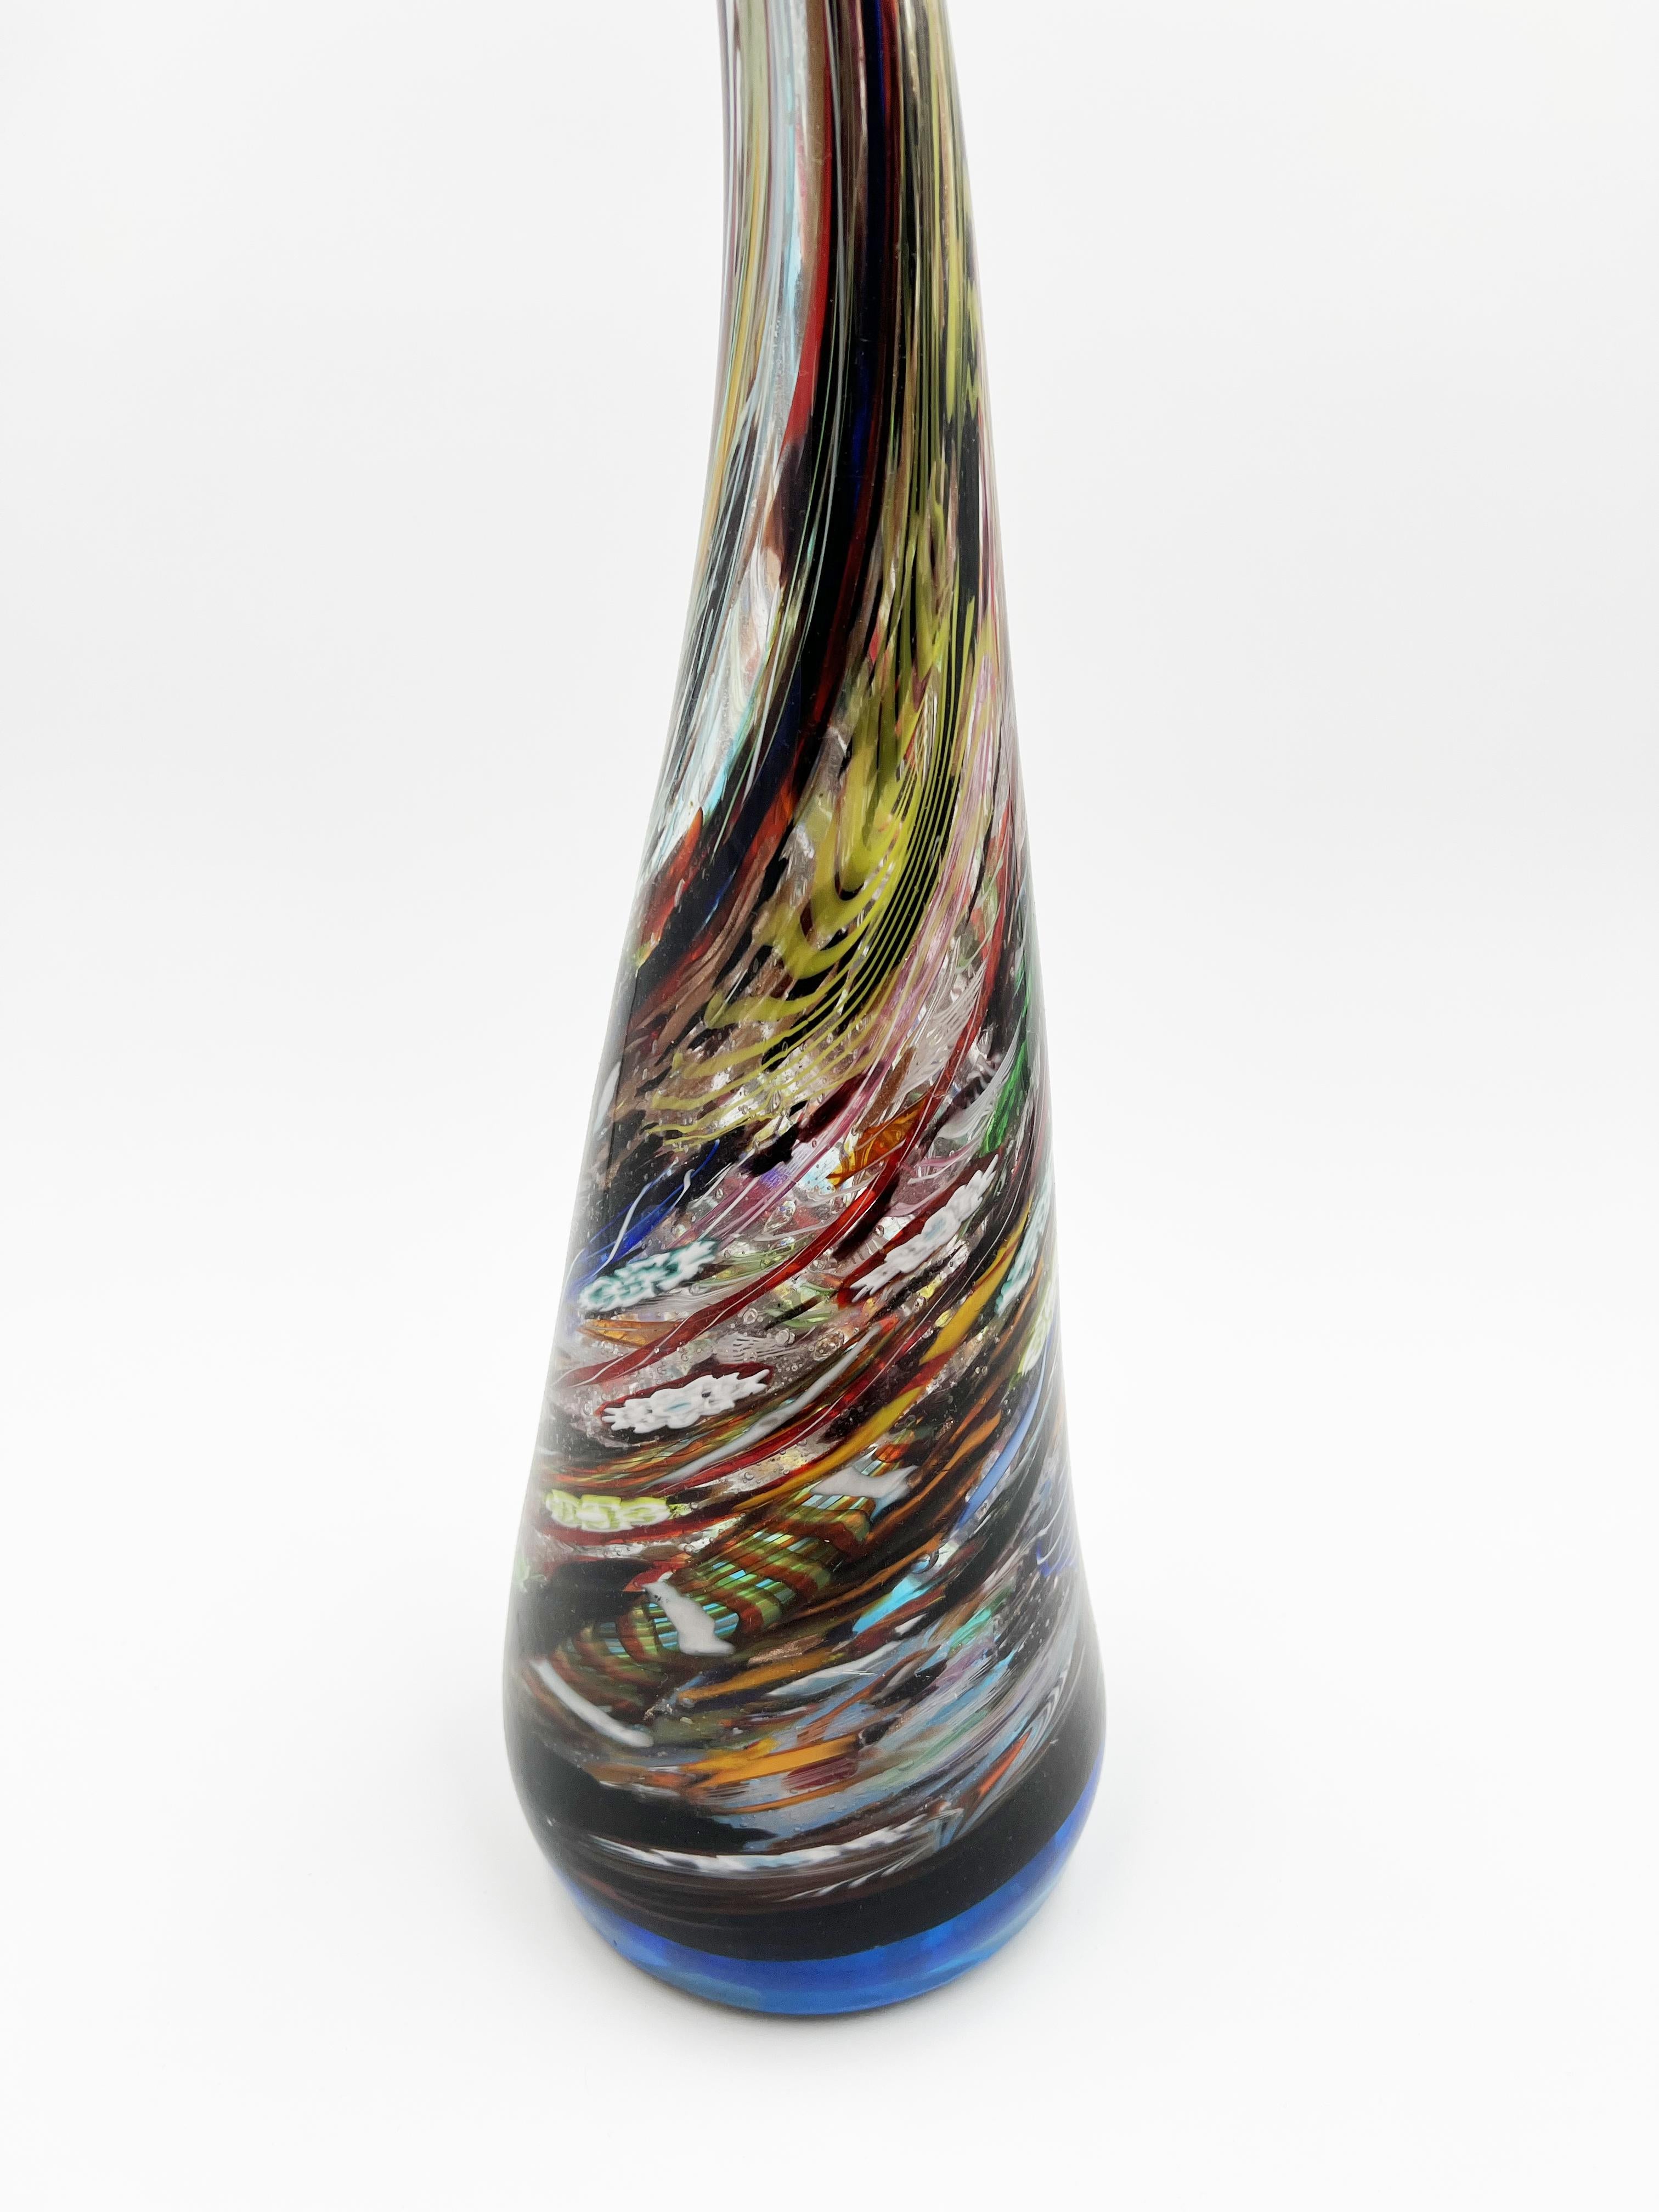 Beautiful Sirvantese vase in the style of Dino Martens. The original piece that inspired it (Sirvantese Bottle 1956 Mod. 6319) was sold at Wright's auction in Chicago for $221,000. It is not excluded that it may have been made by the master himself.